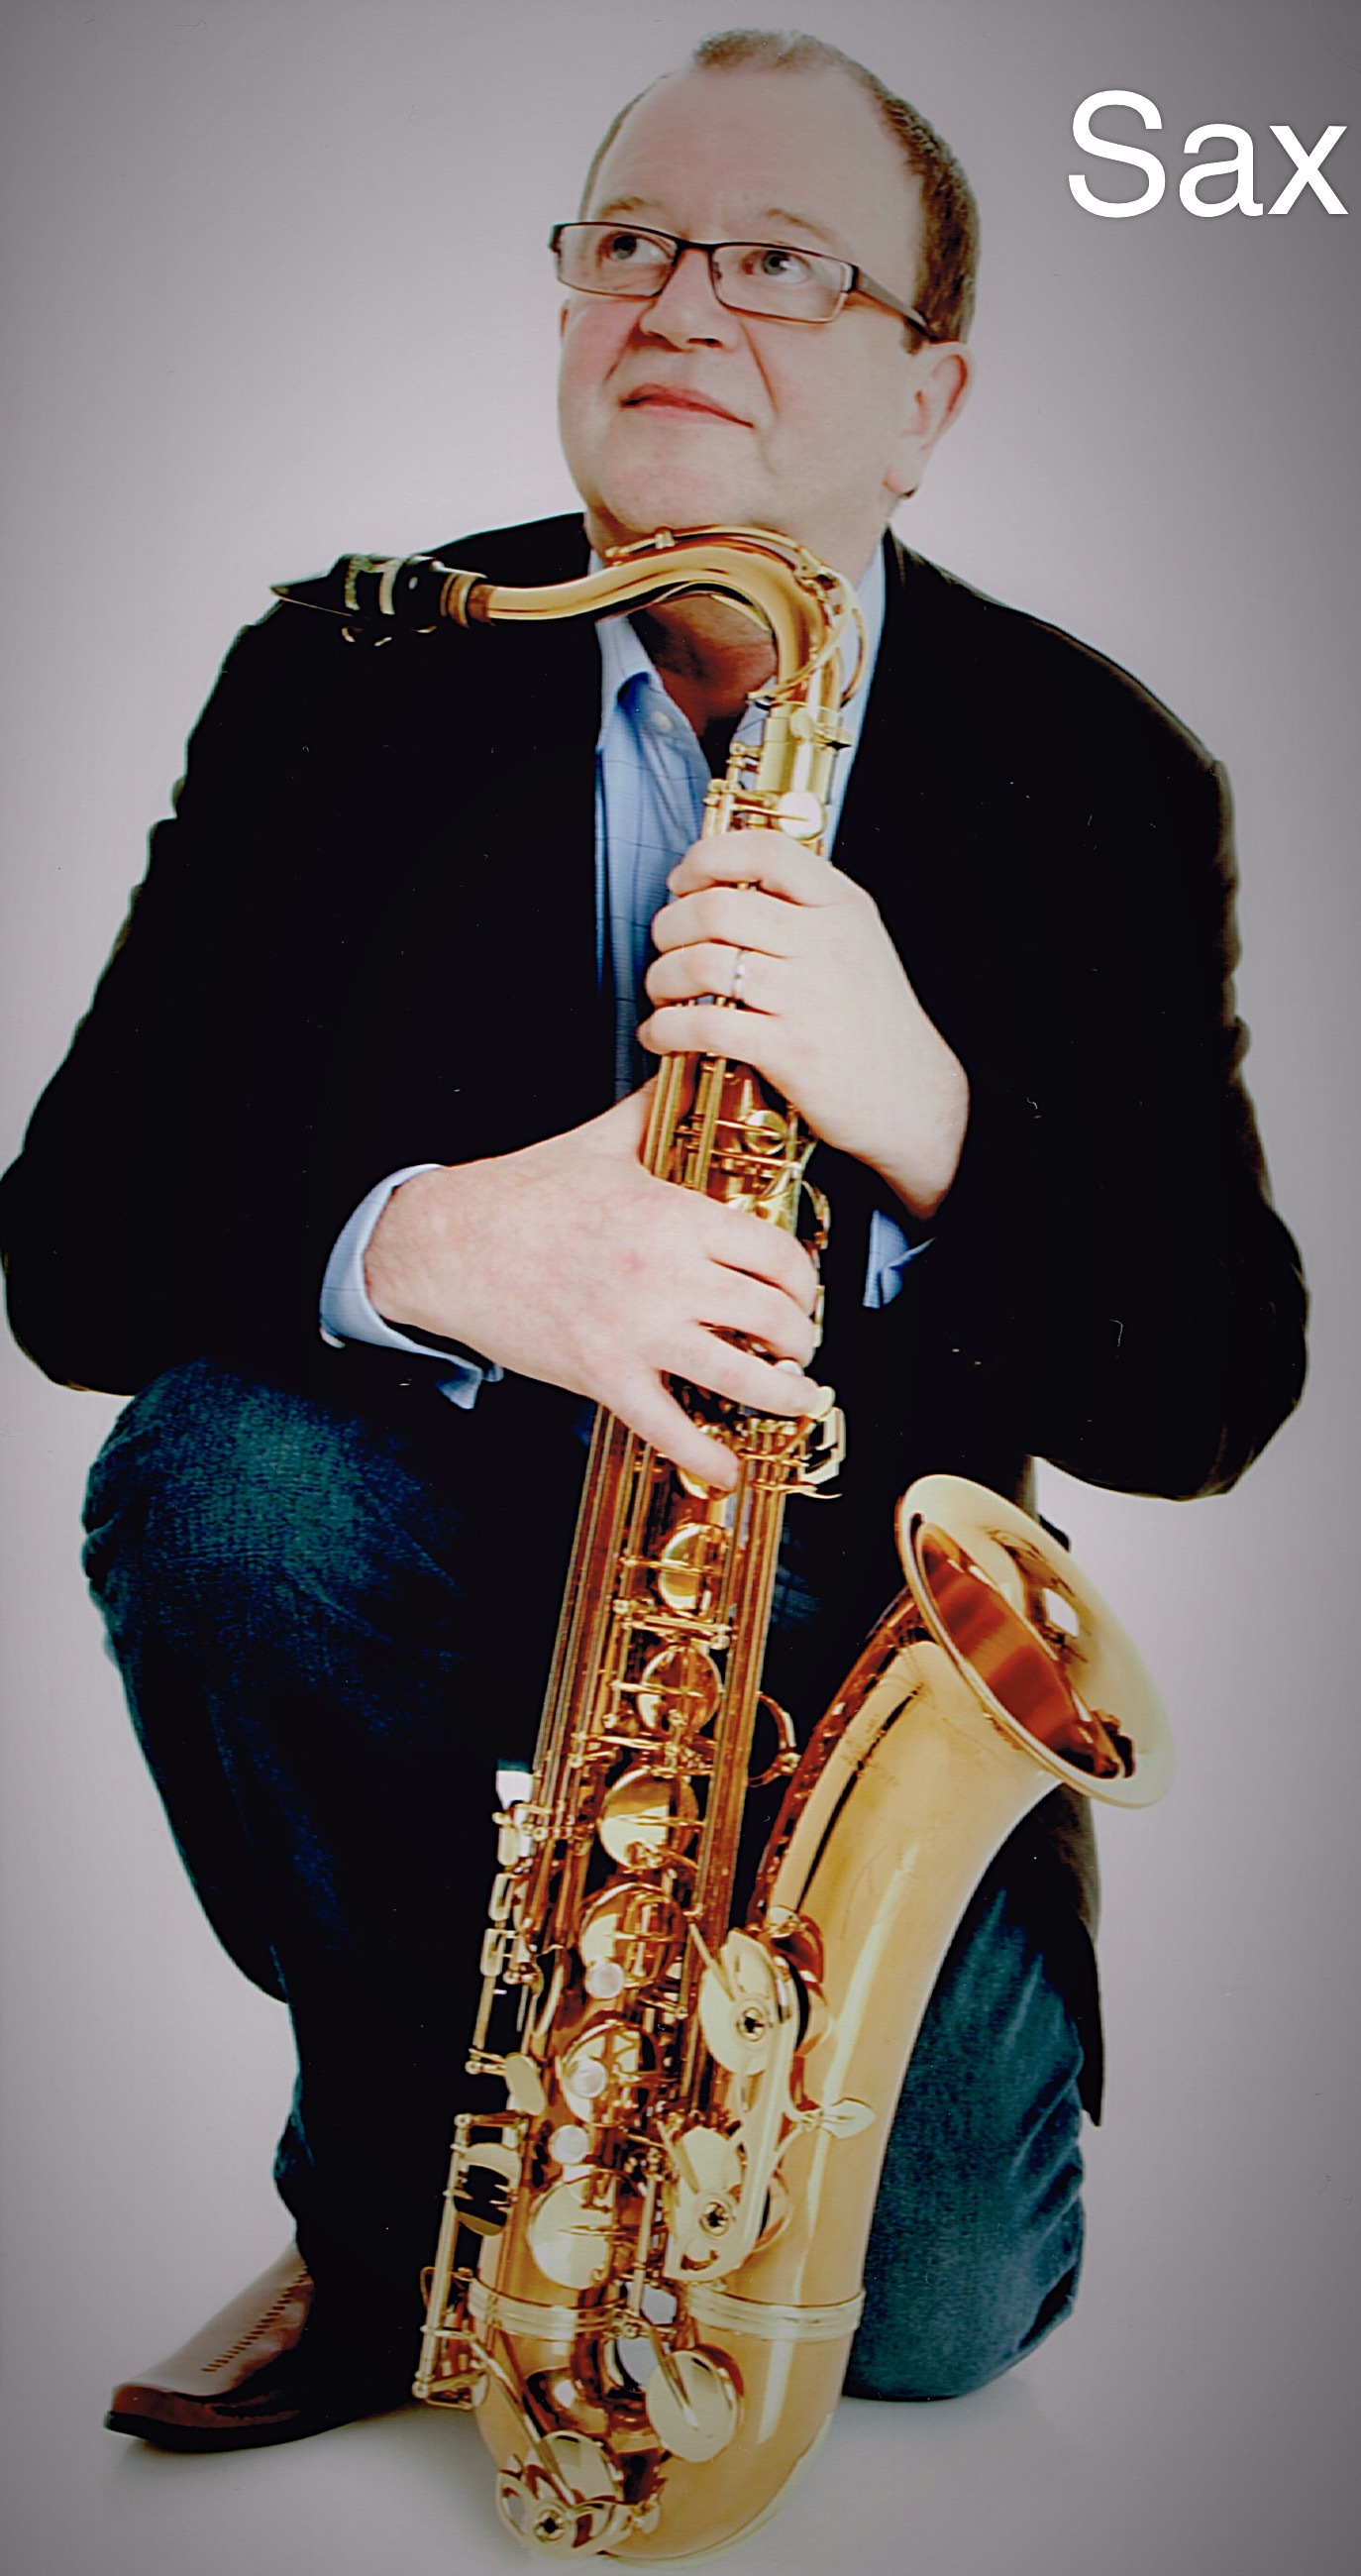 Saxophonist Ken in Northumbria, the North West